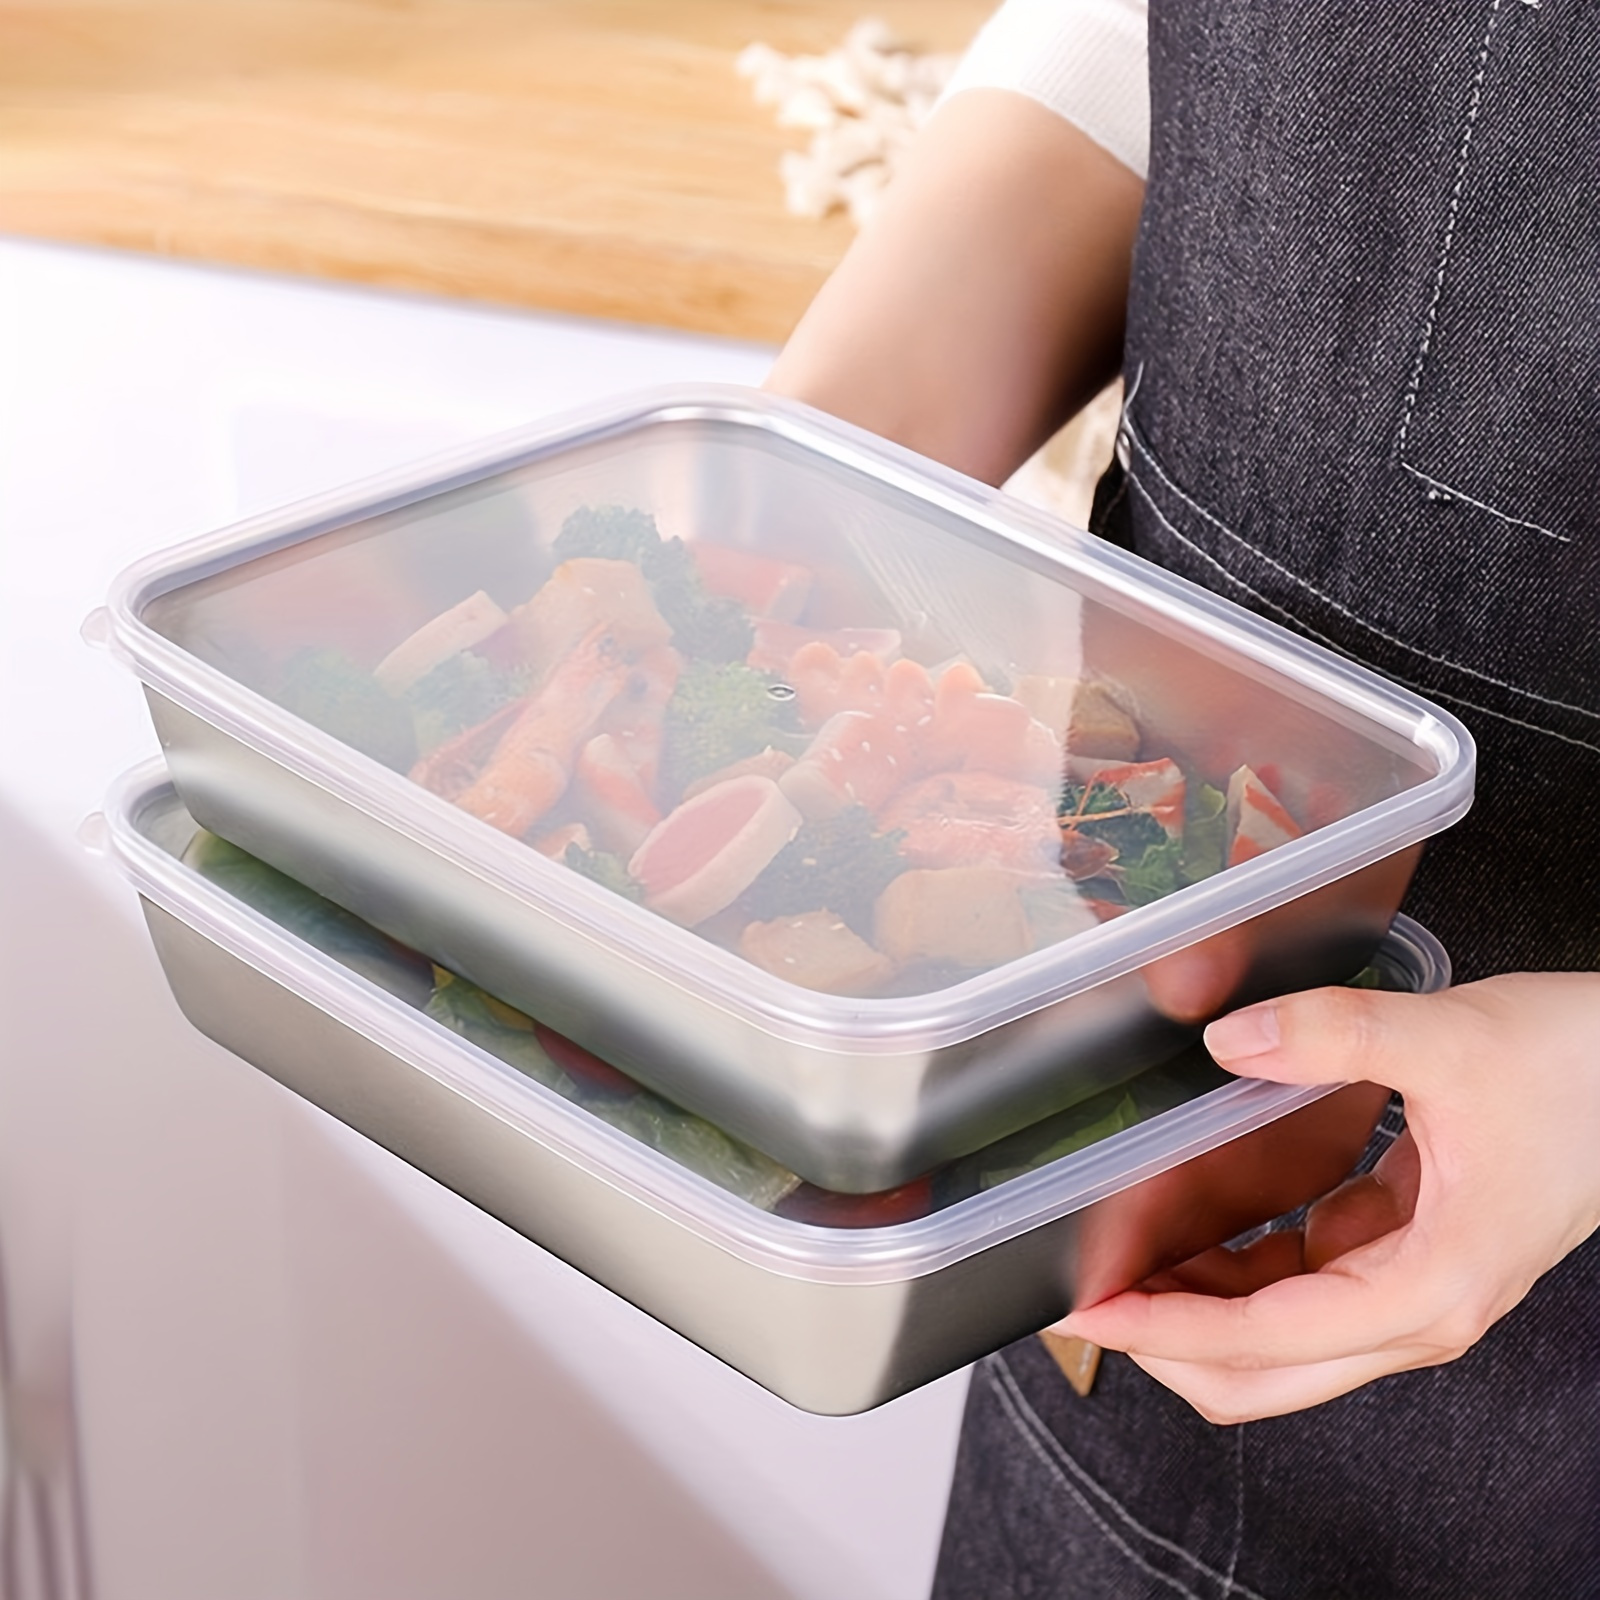 

1pc Storage Container, Stainless Steel Freshness Box With Lid, Portable And Leak Proof Food Sealed Box, For Grain, Fruit, Vegetable And Meat, Kitchen Organizers And Storage, Kitchen Accessories